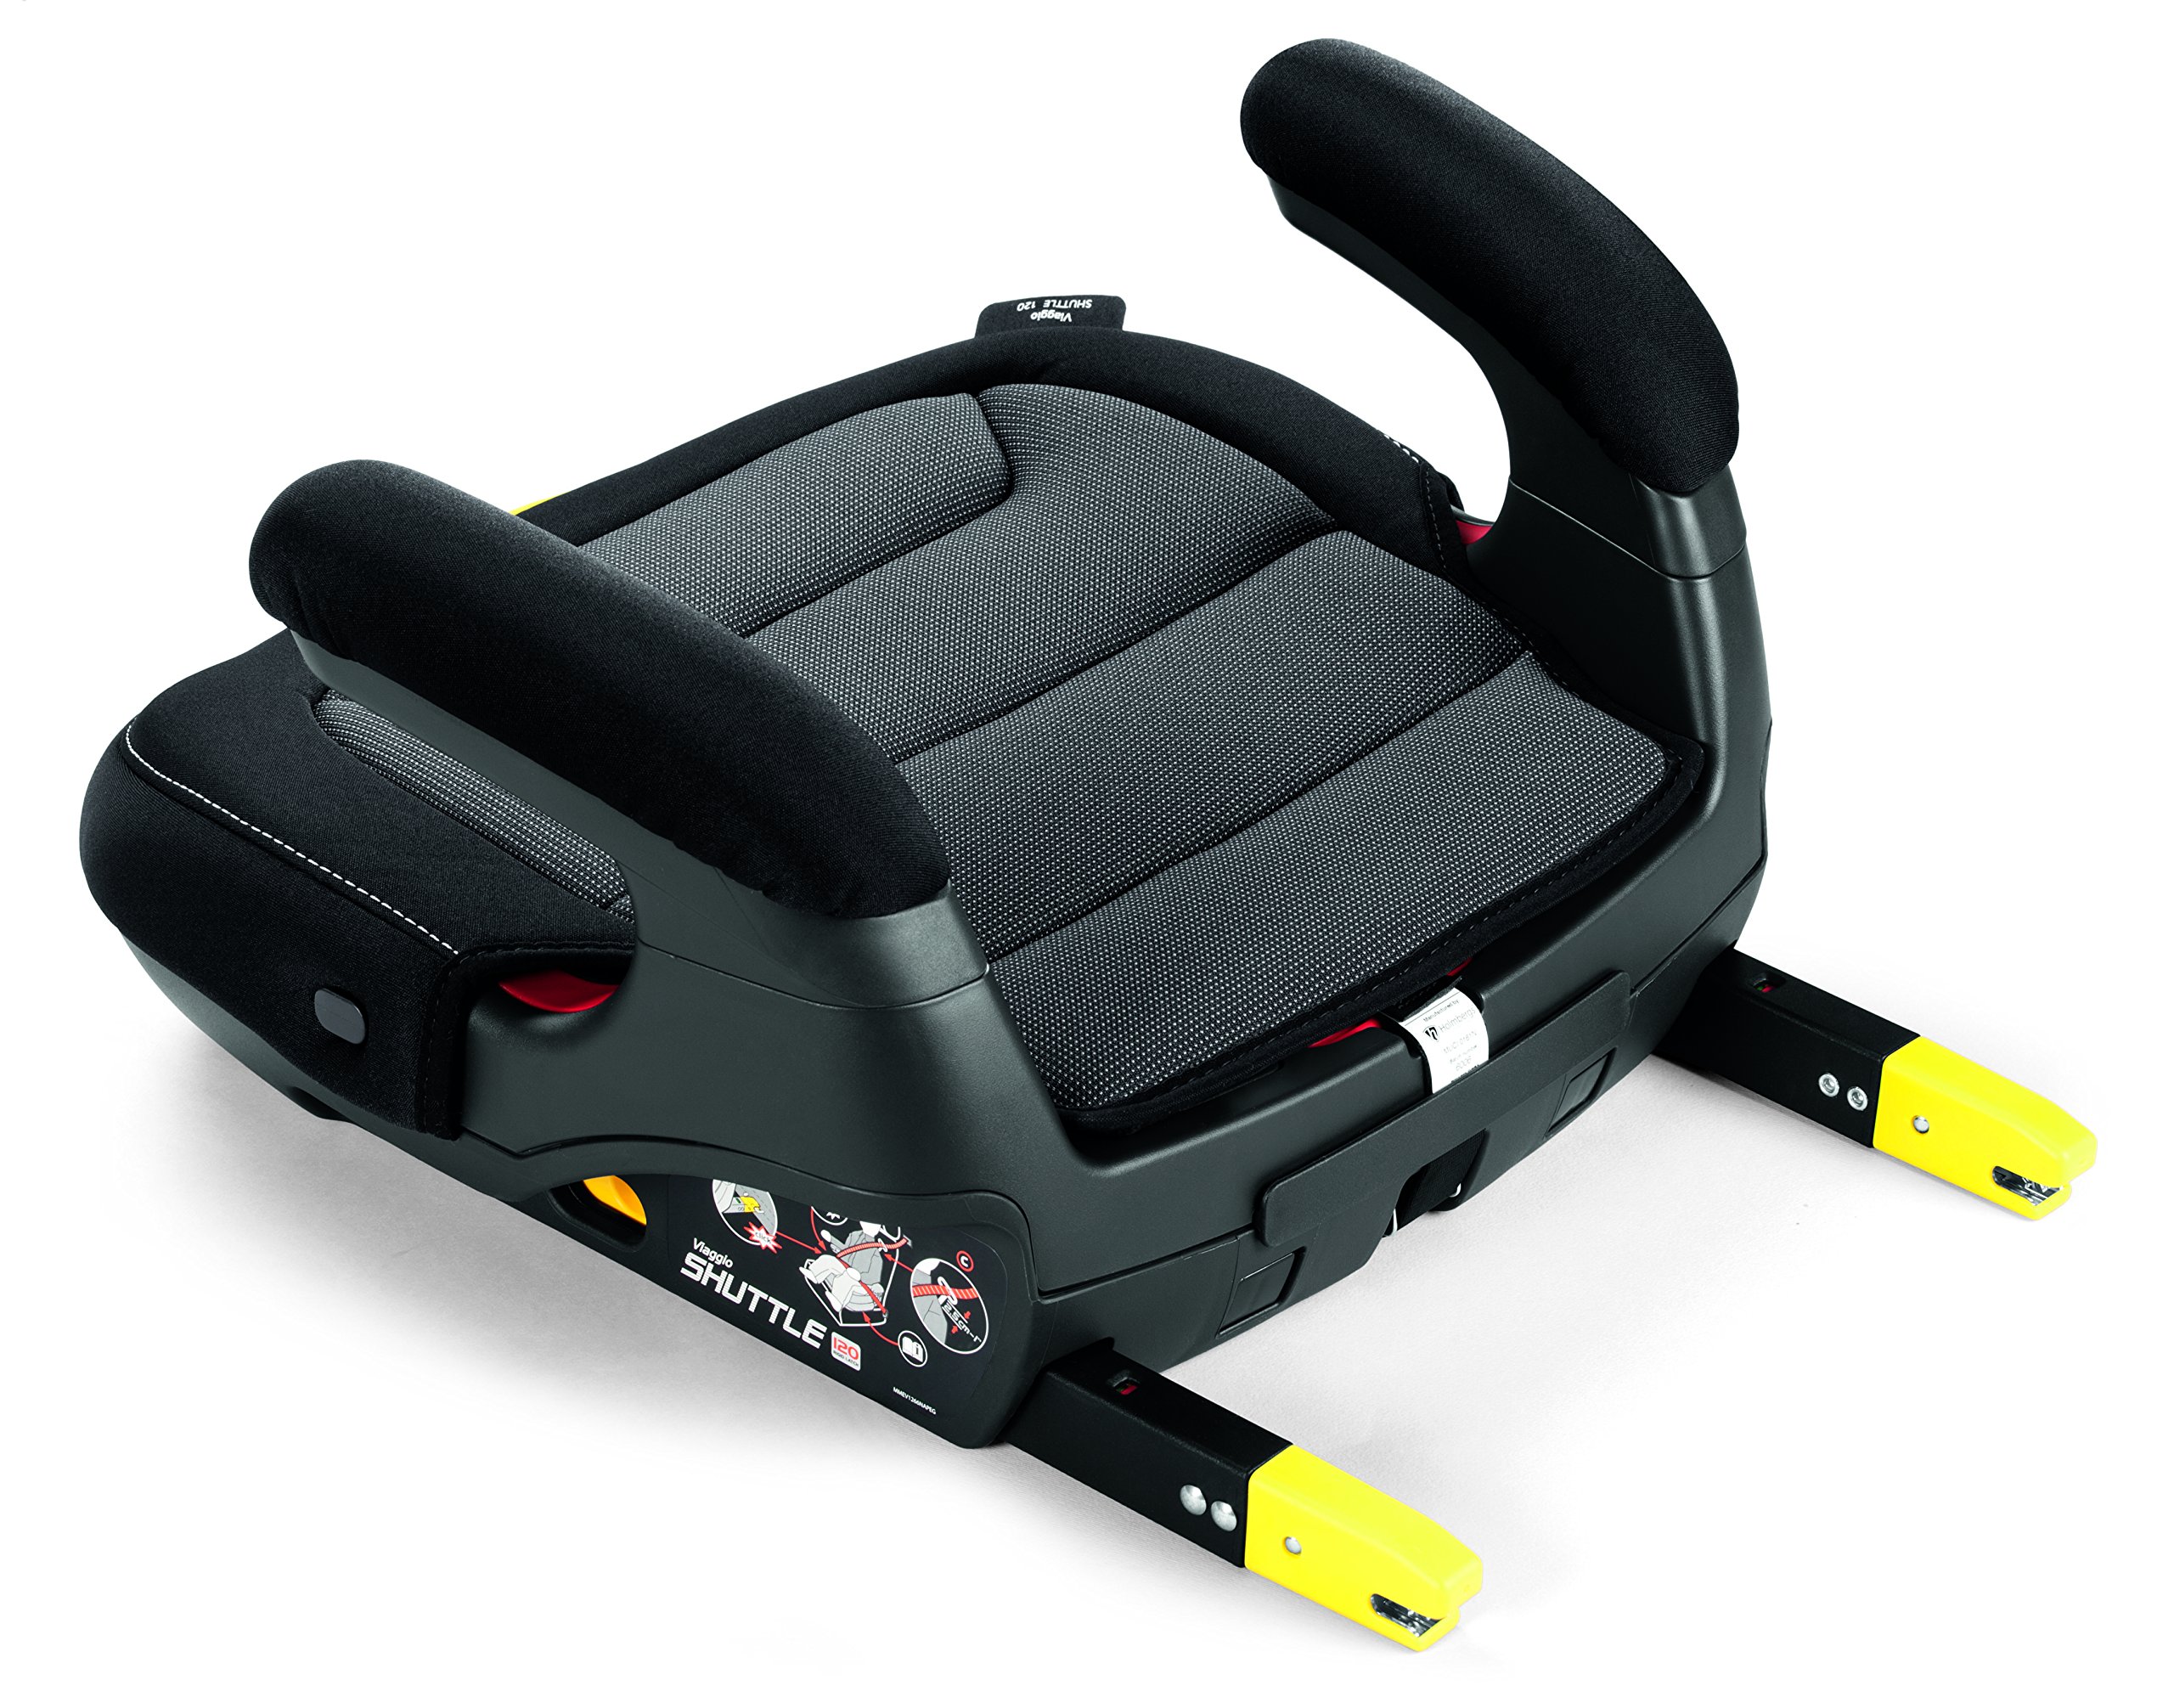 Peg Perego Viaggio Shuttle - Booster Car Seat - for Children from 40 to 120 lbs - Made in Italy - Licorice (Black)